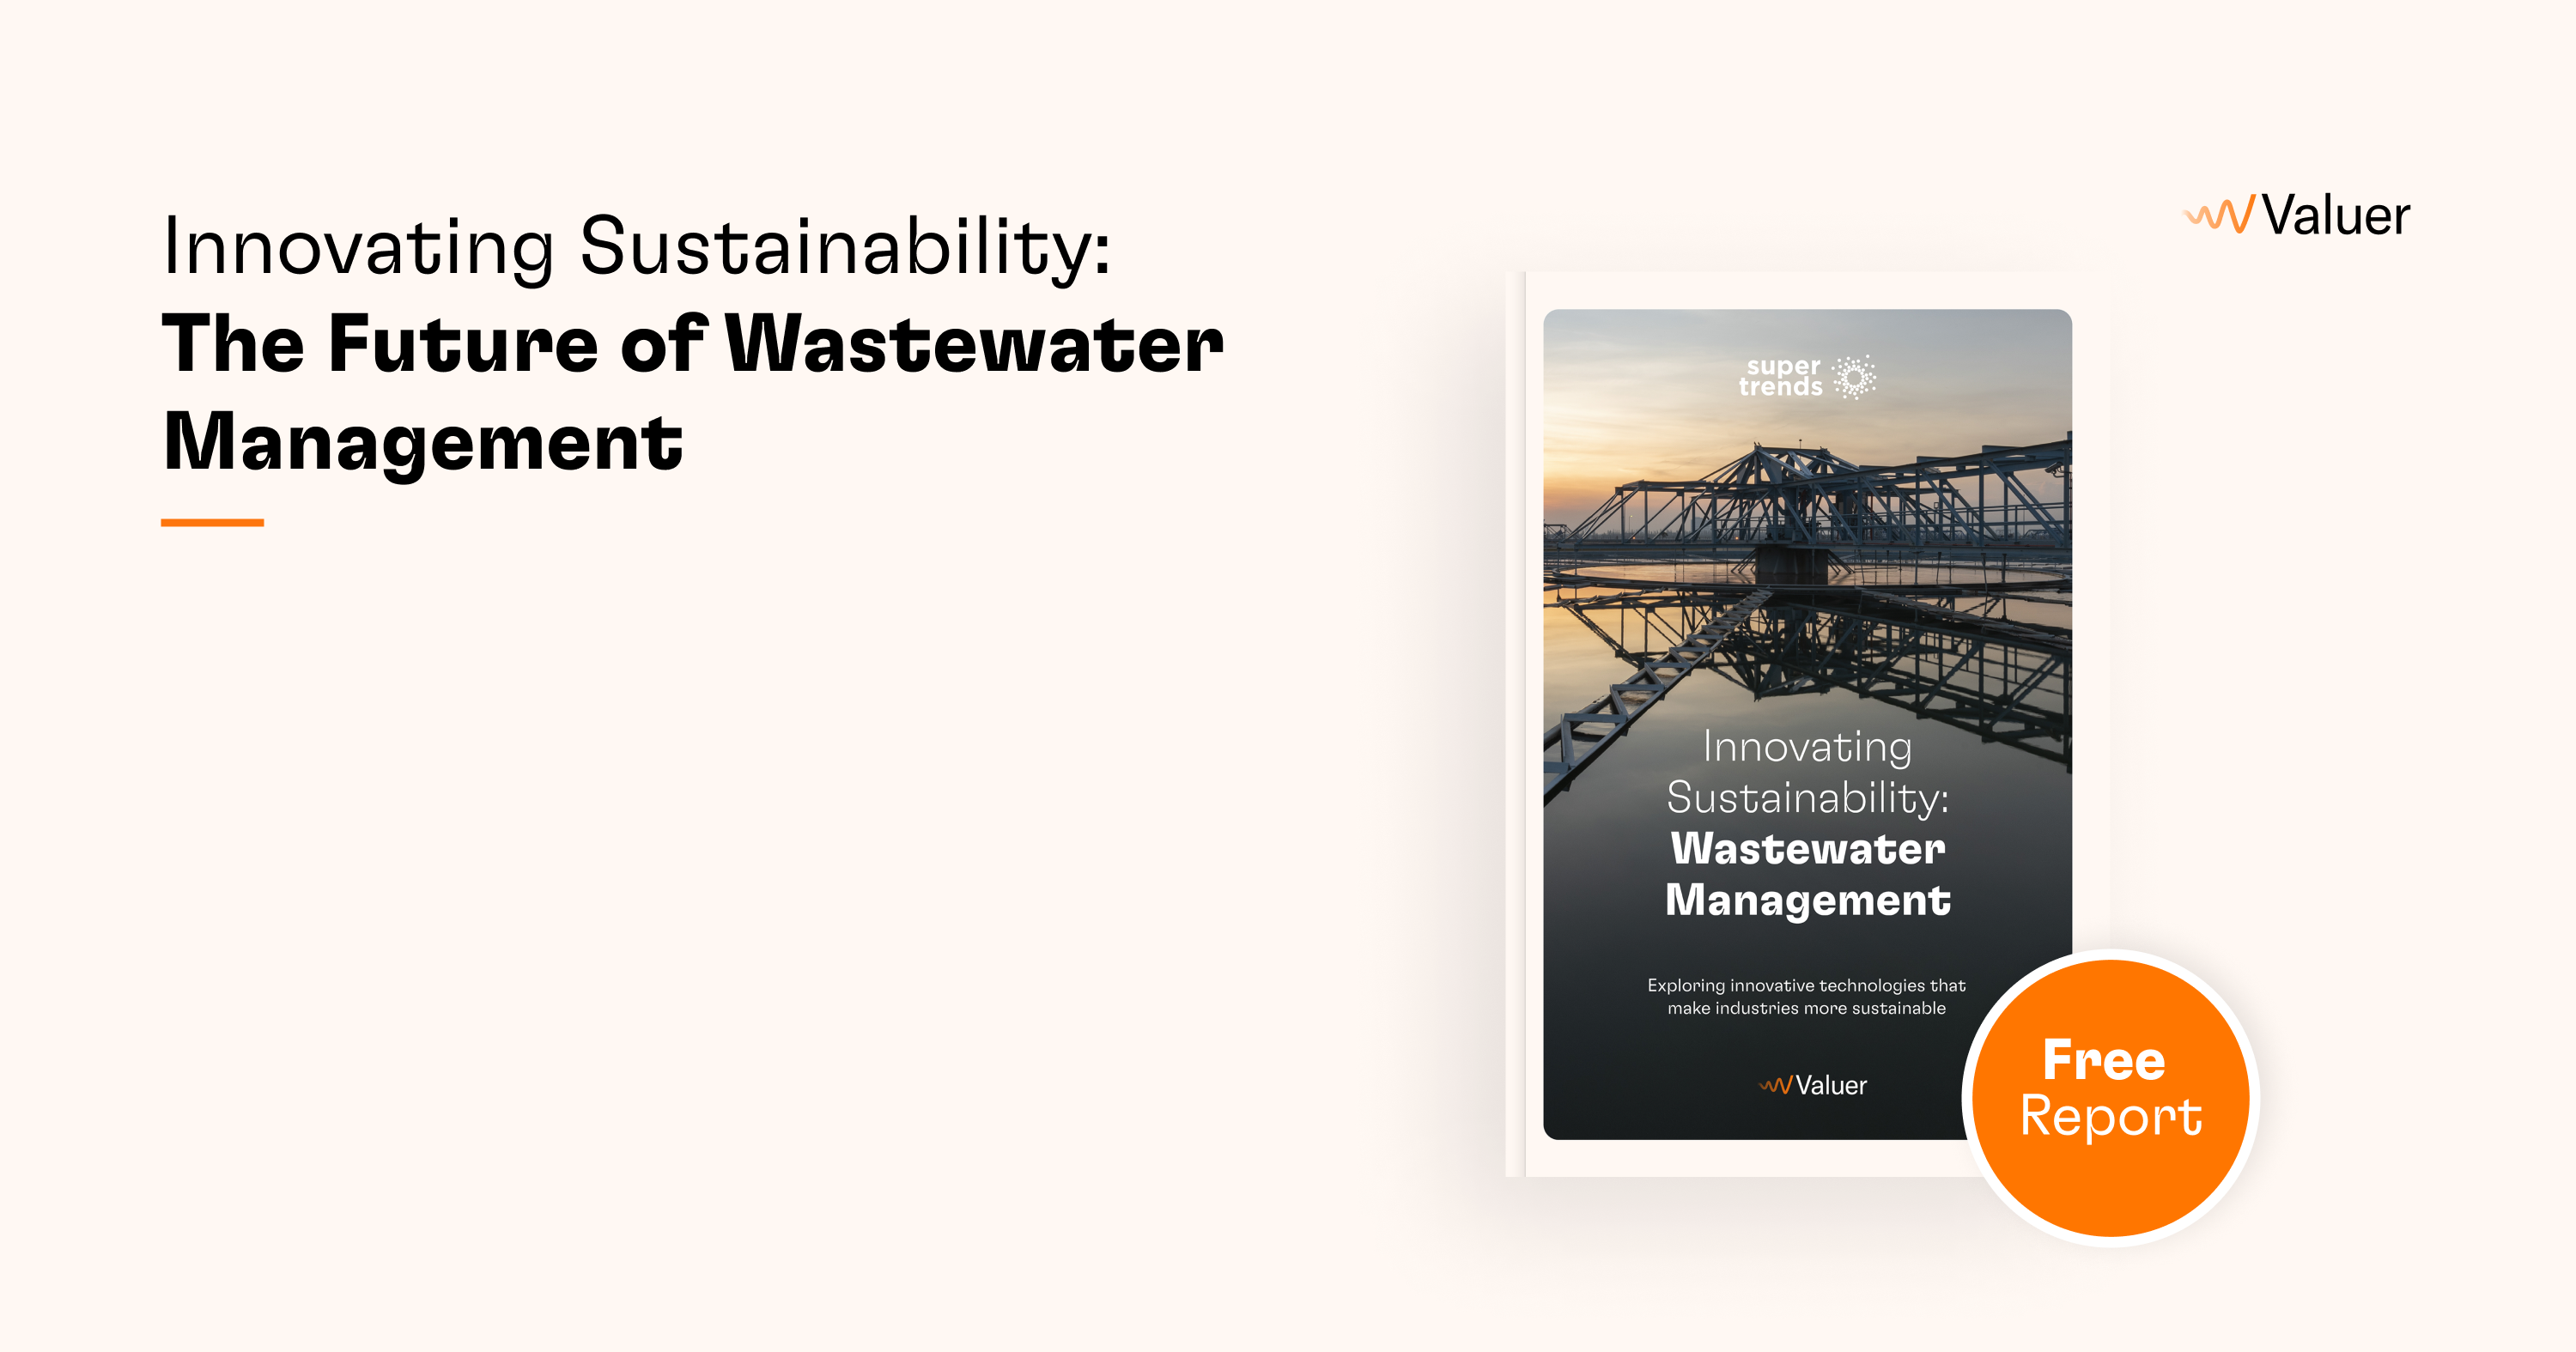 Innovating Sustainability: The Future of Wastewater Management